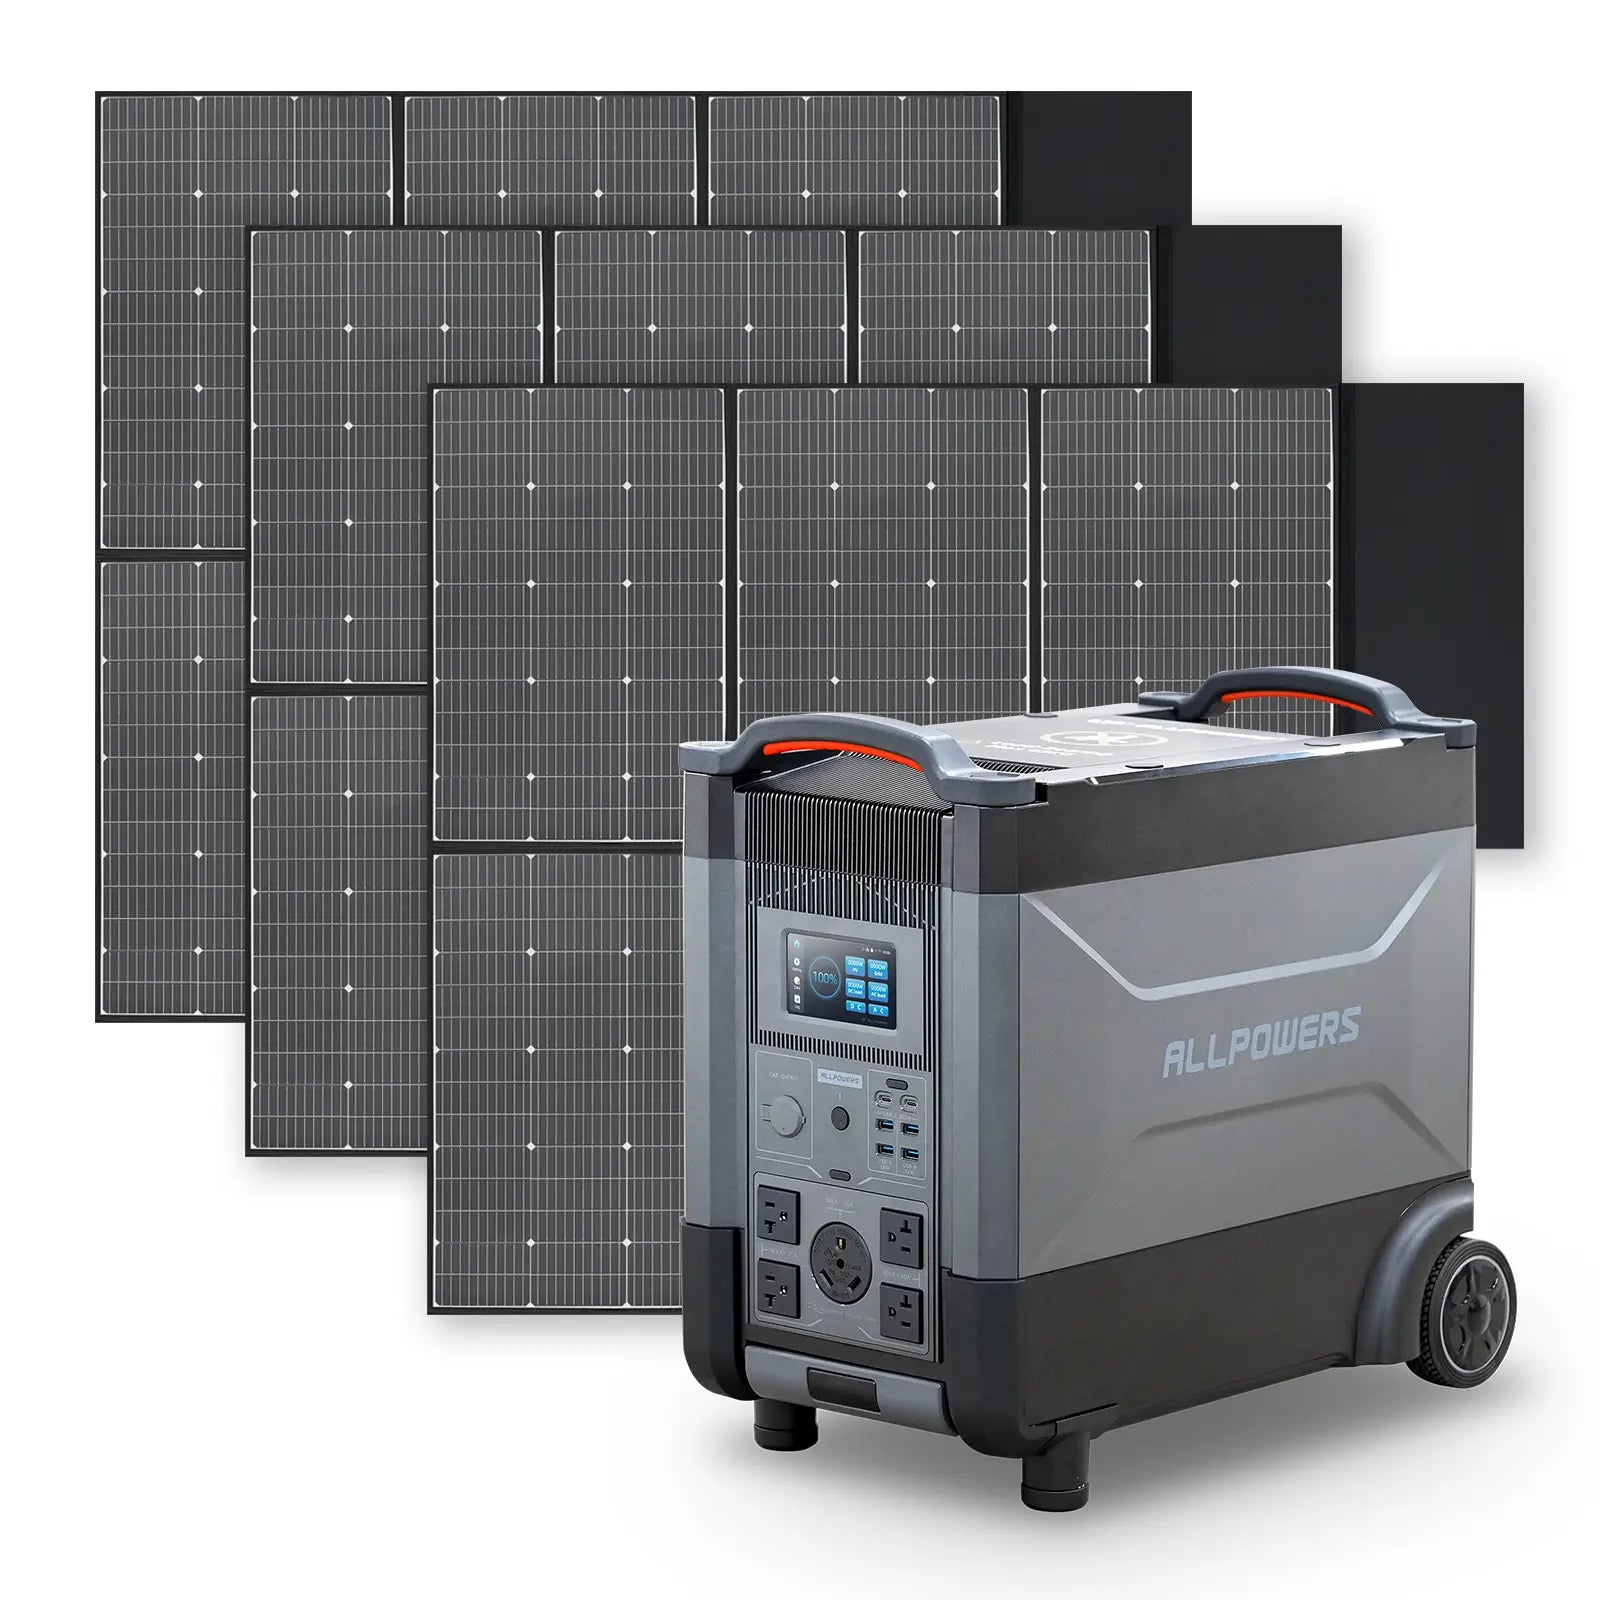 ALLPOWERS R4000 Portable Power Station 4000W 3600Wh (R4000 + 3 x SP039 600W Solar Panel)